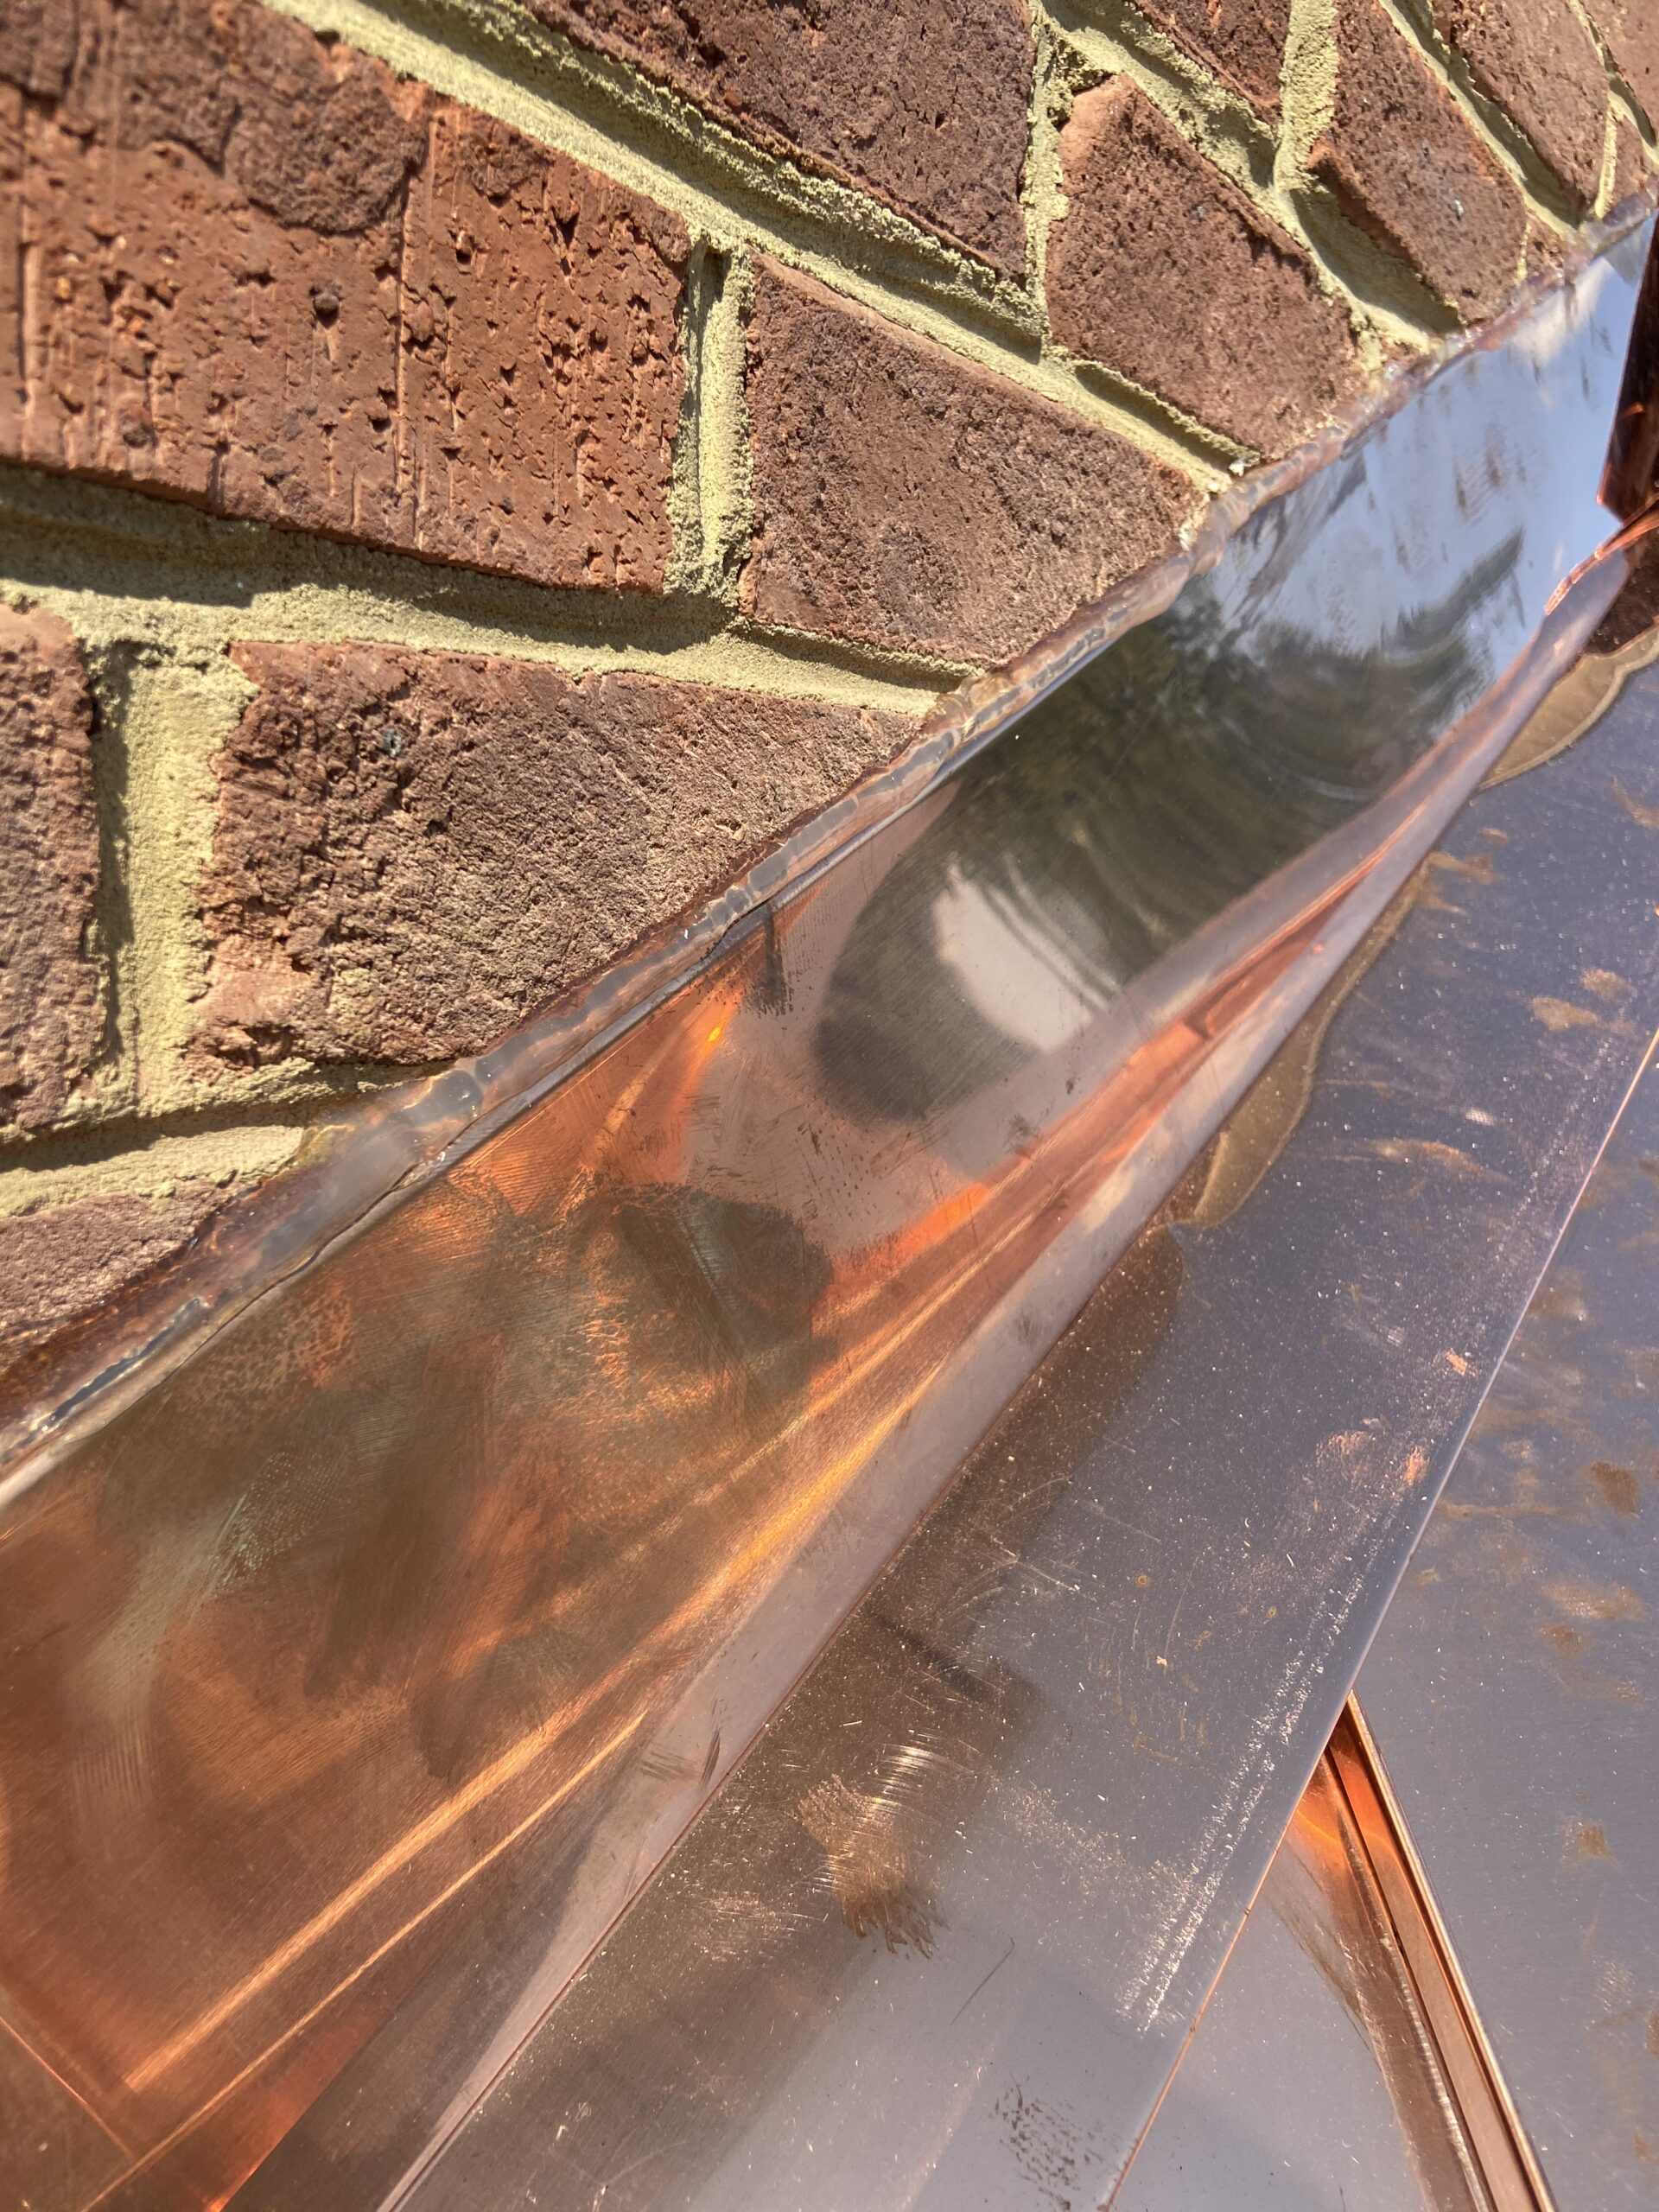 Shiney copper metal roof is sealed into bricks